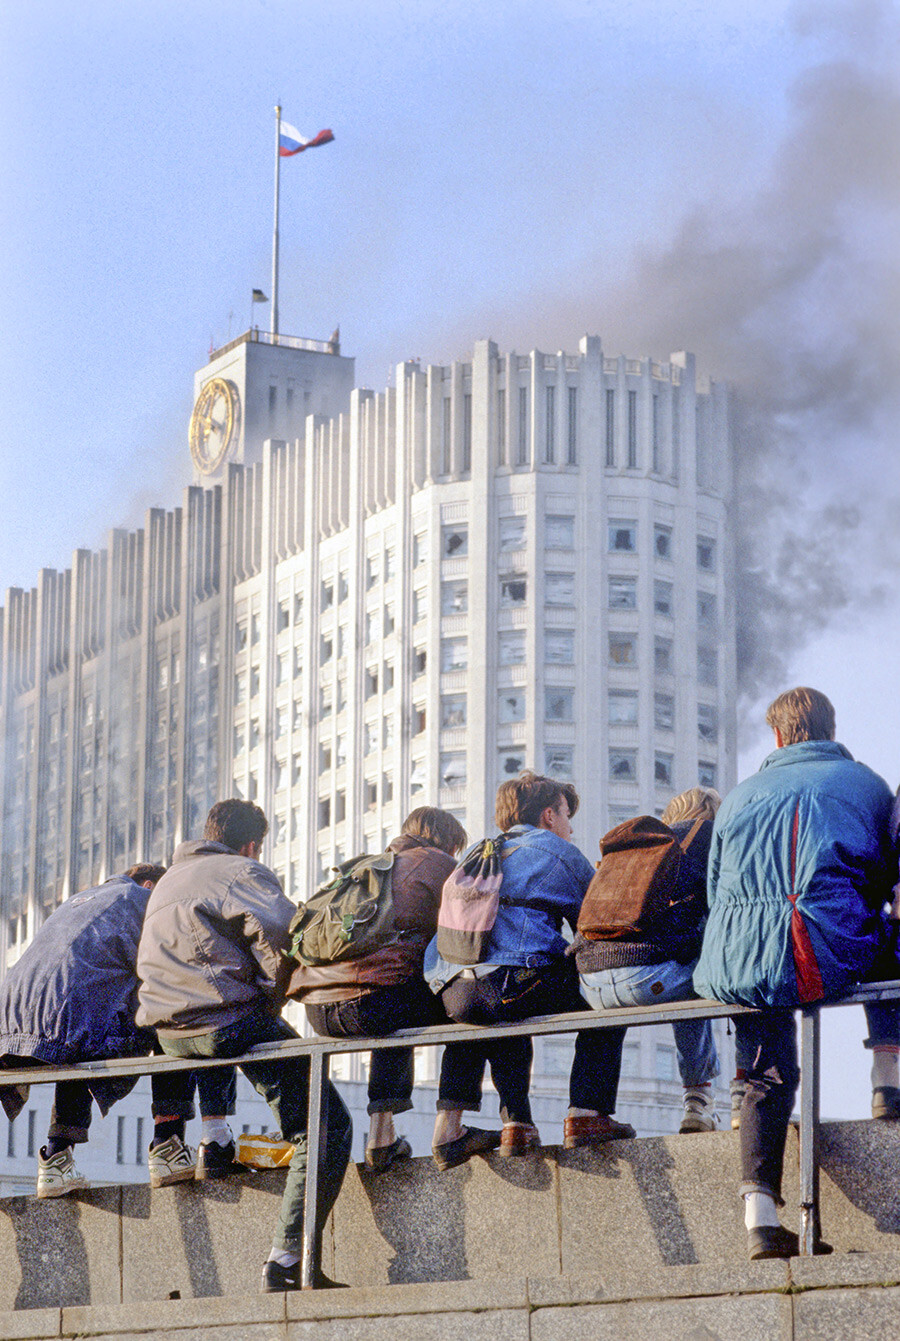 The Russian parliament burns after government troops storm it. 
The constitutional crisis of 1993. 